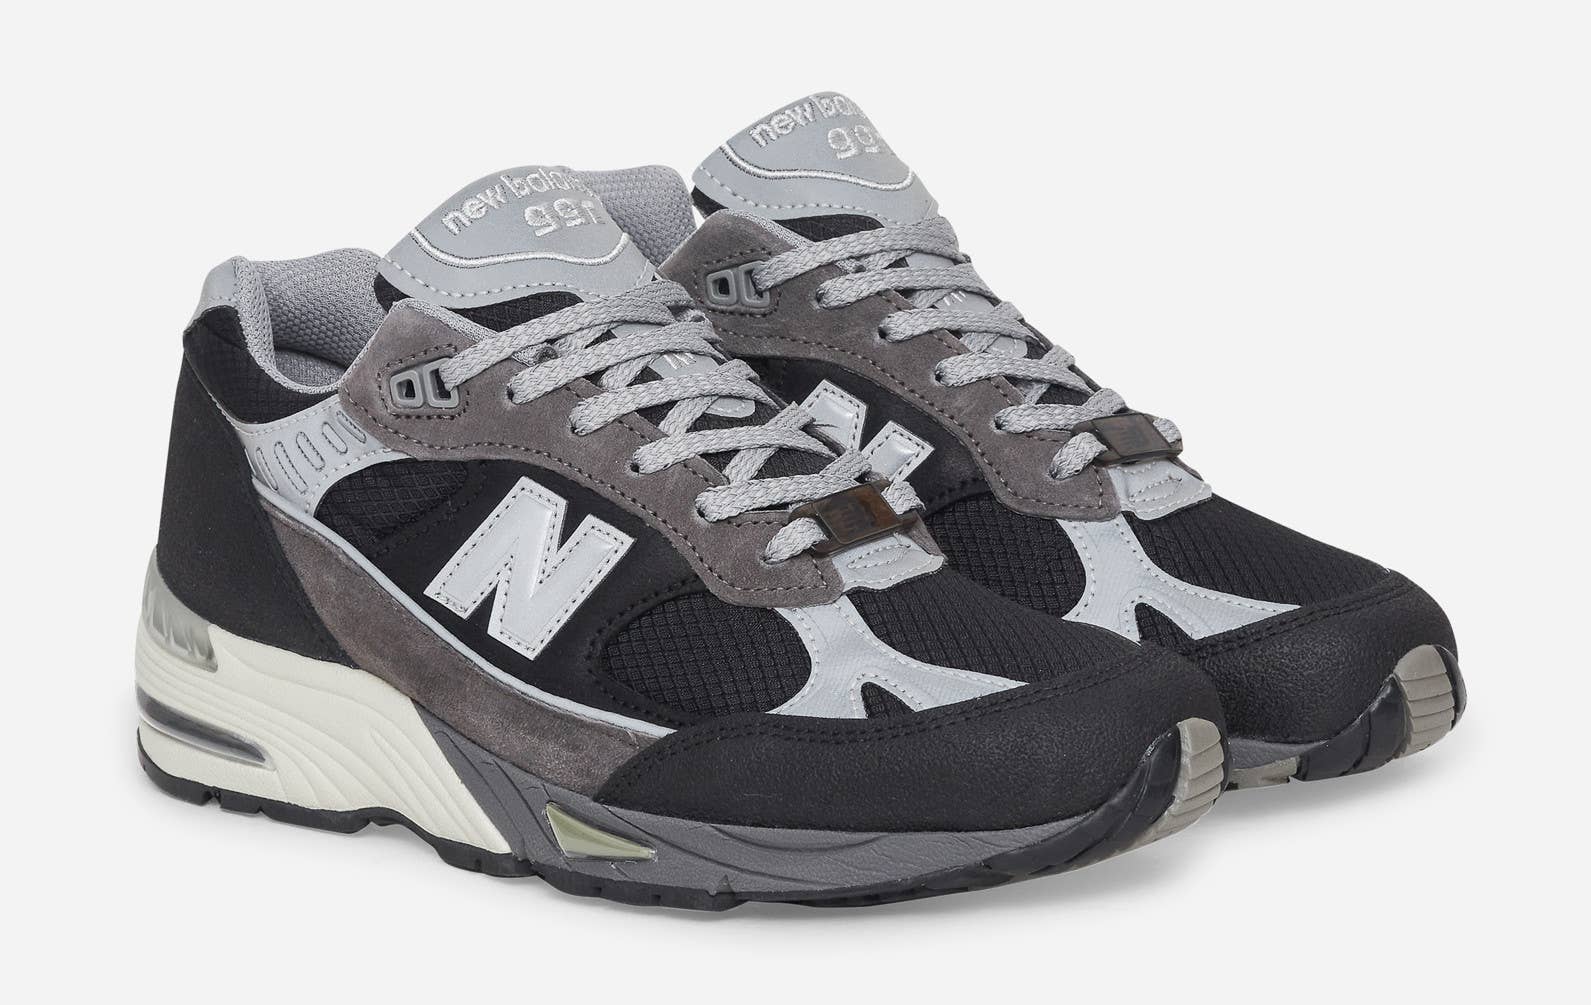 Slam Jam's New Balance 991 Collab Is Made for Everyday Wear | Complex